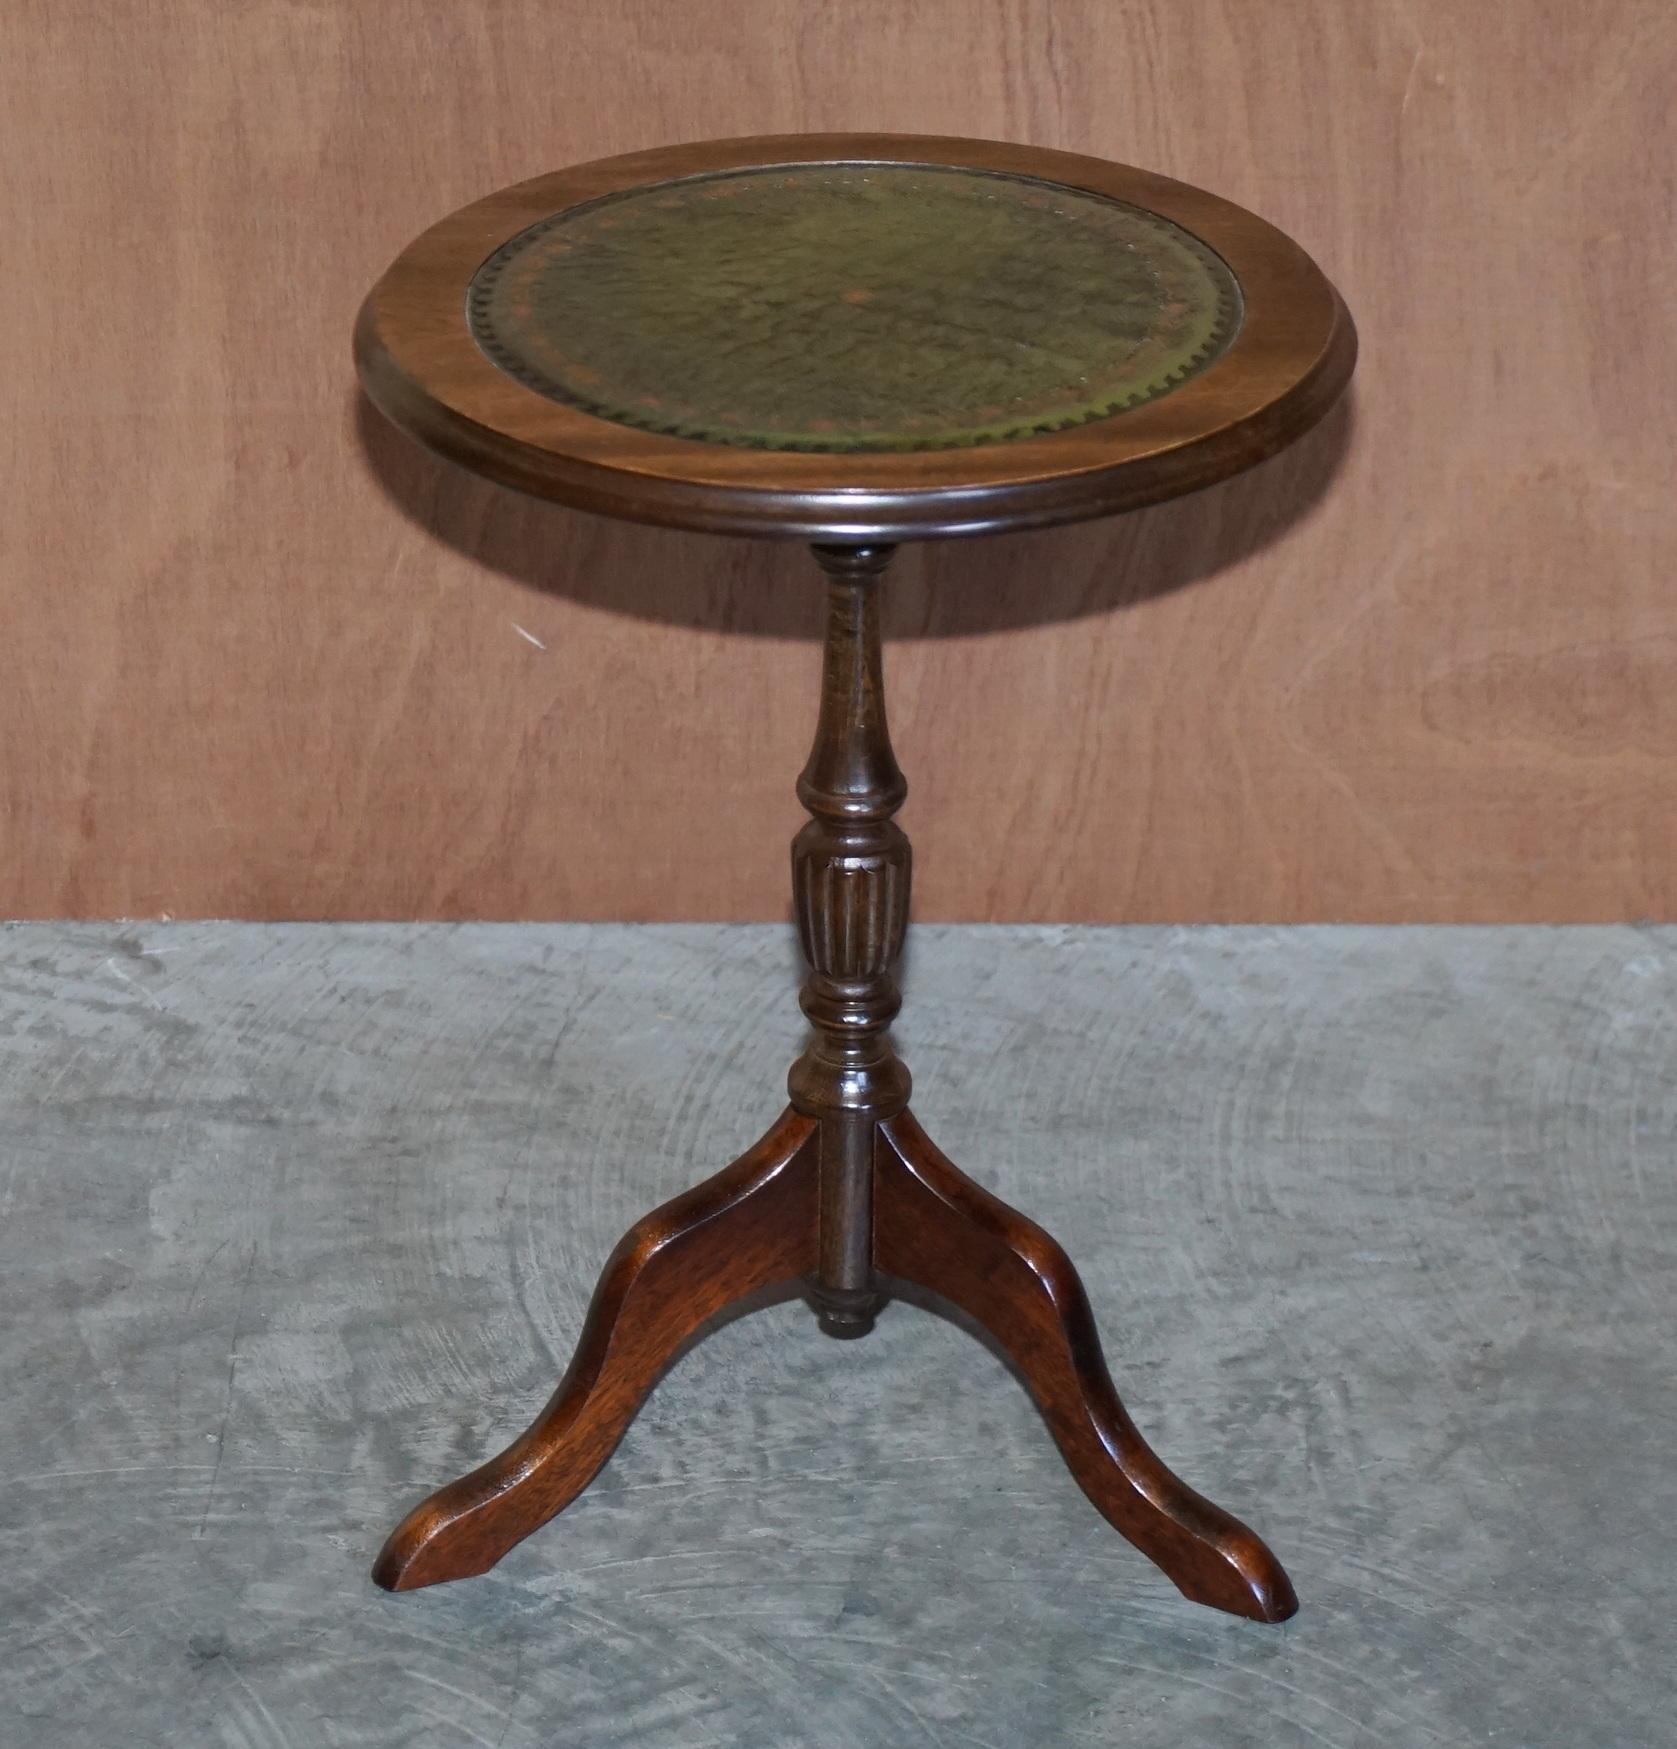 We are delighted to offer for sale this lovely vintage Mahogany, green leather topped lamp or side table with gold leaf inlaid boarder 

A good-looking well-made tripod table in good, we have cleaned waxed and polished it from top to bottom, there